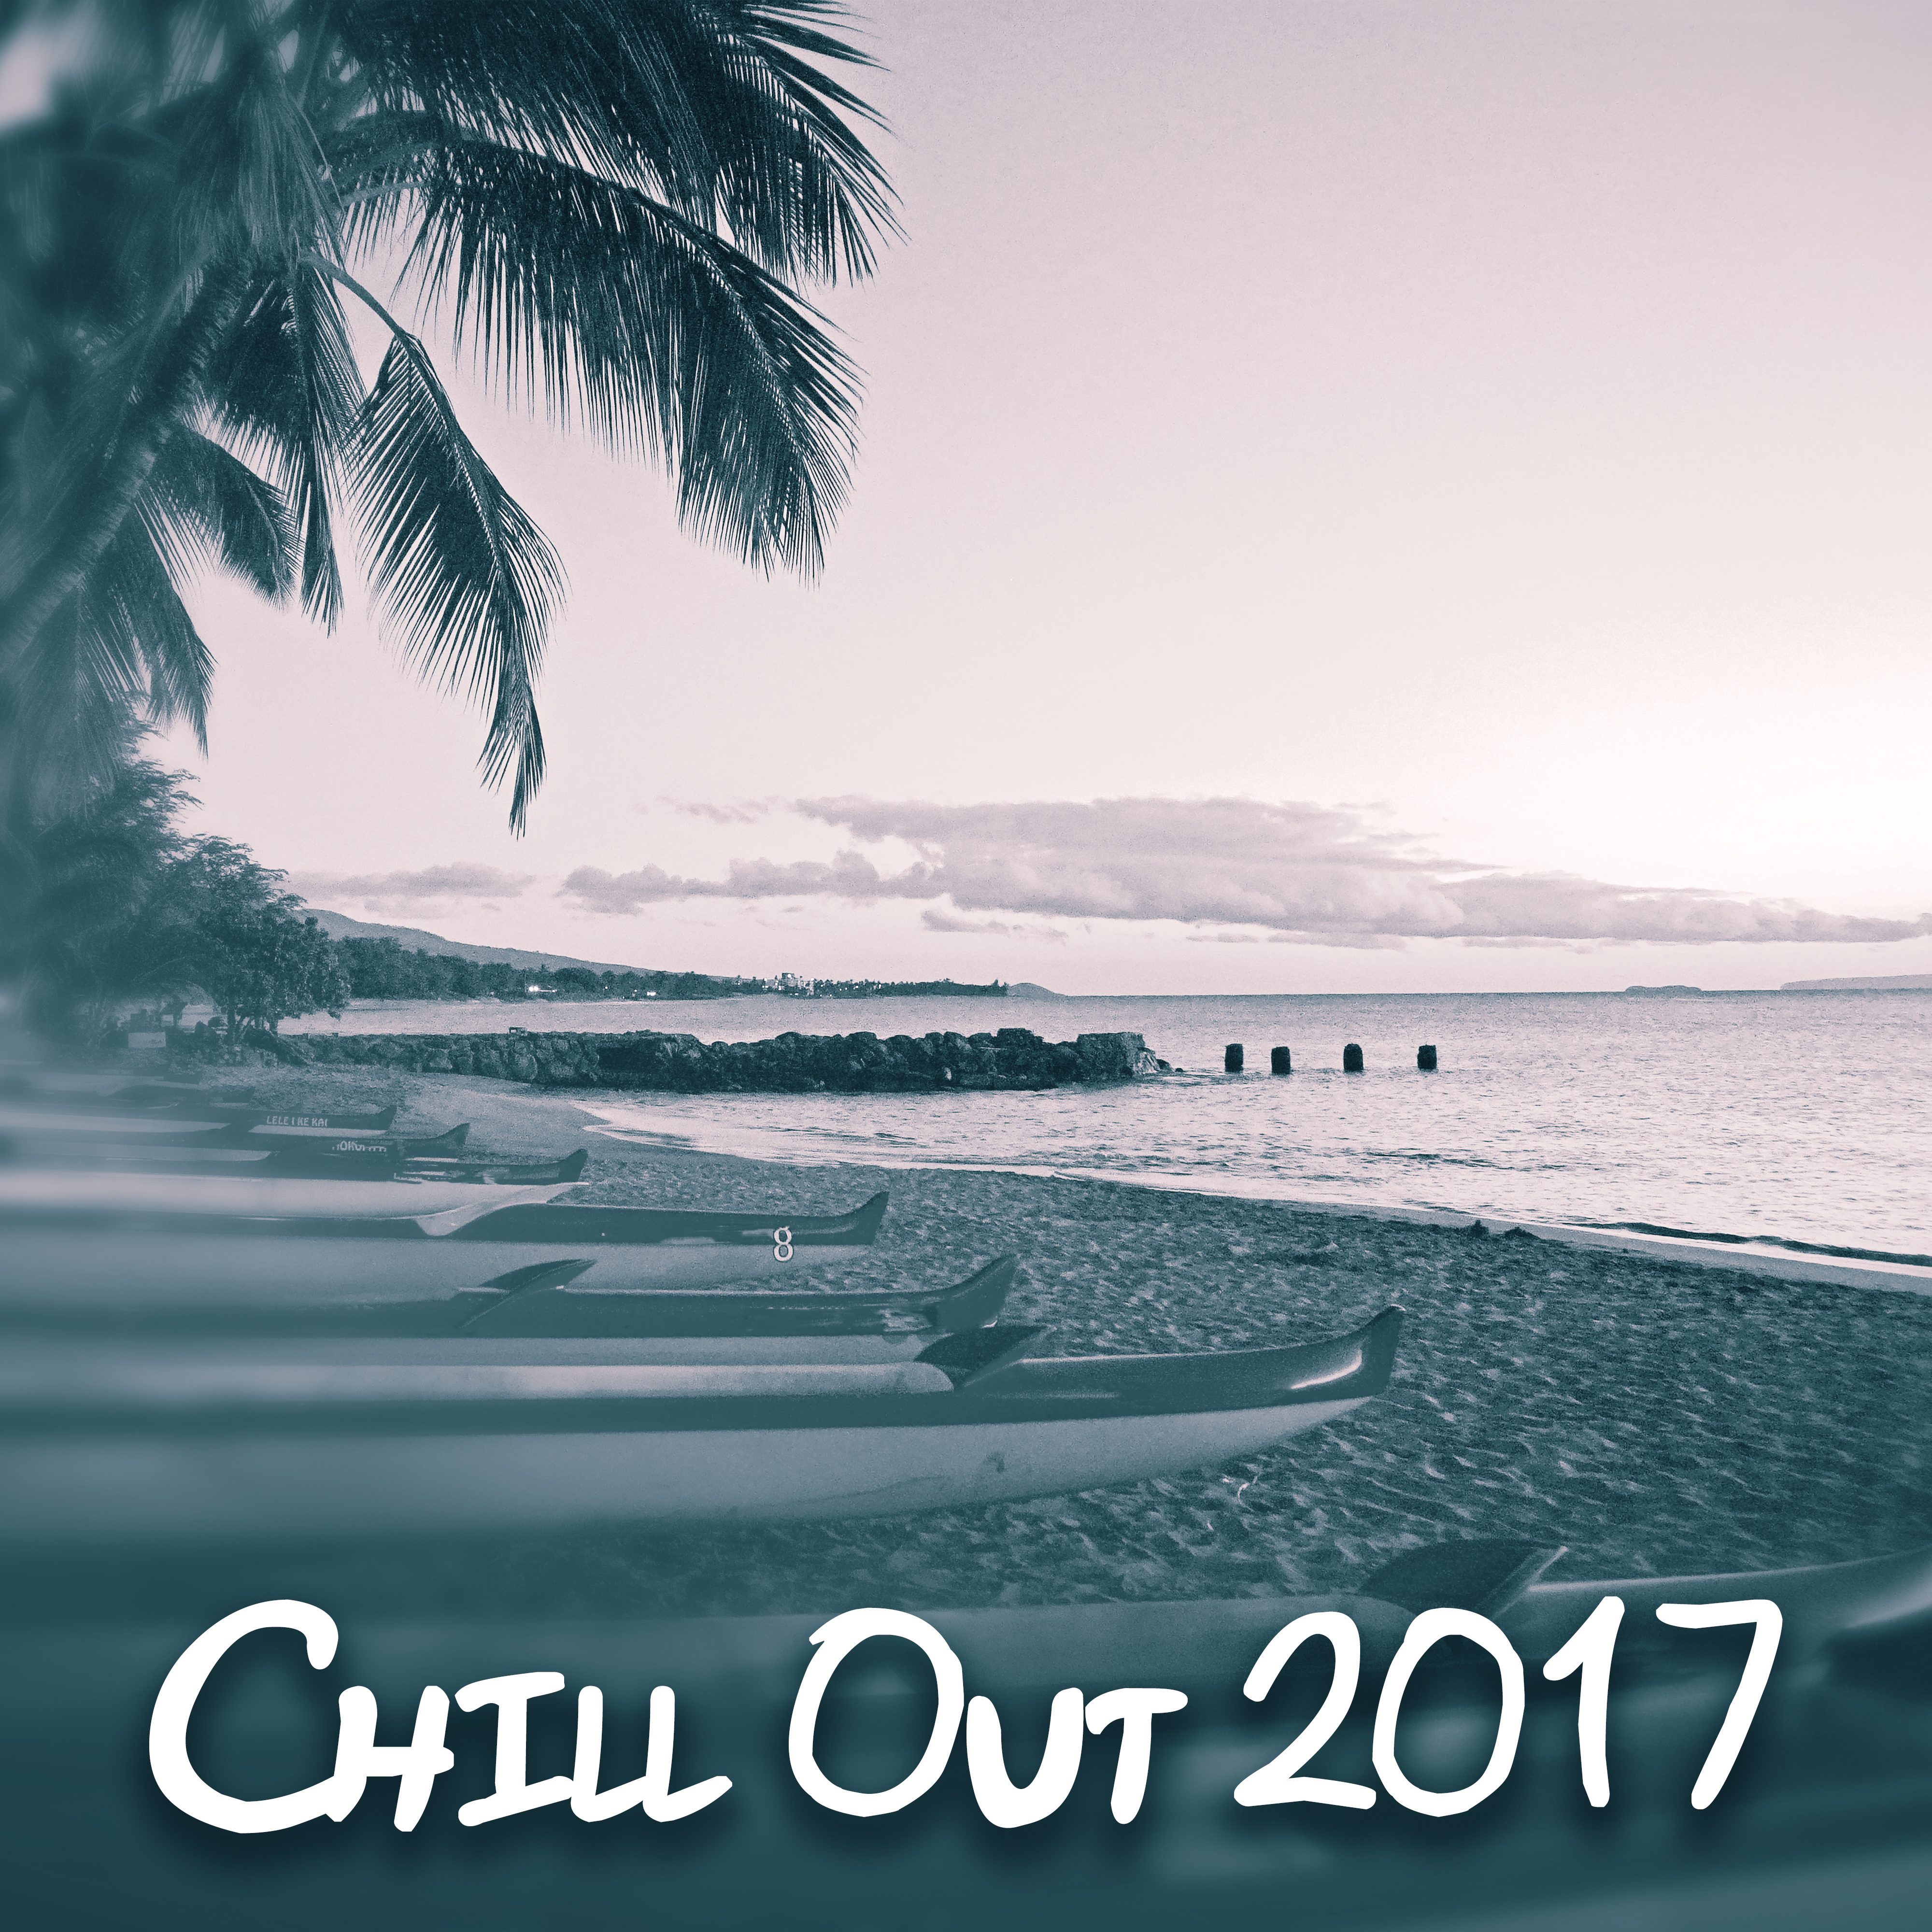 Chill Out 2017  Best Collection for Relaxation, Lounge Mix, Sensual Chill, Time to Cafe, Tropical Sounds, Chillout Lounge